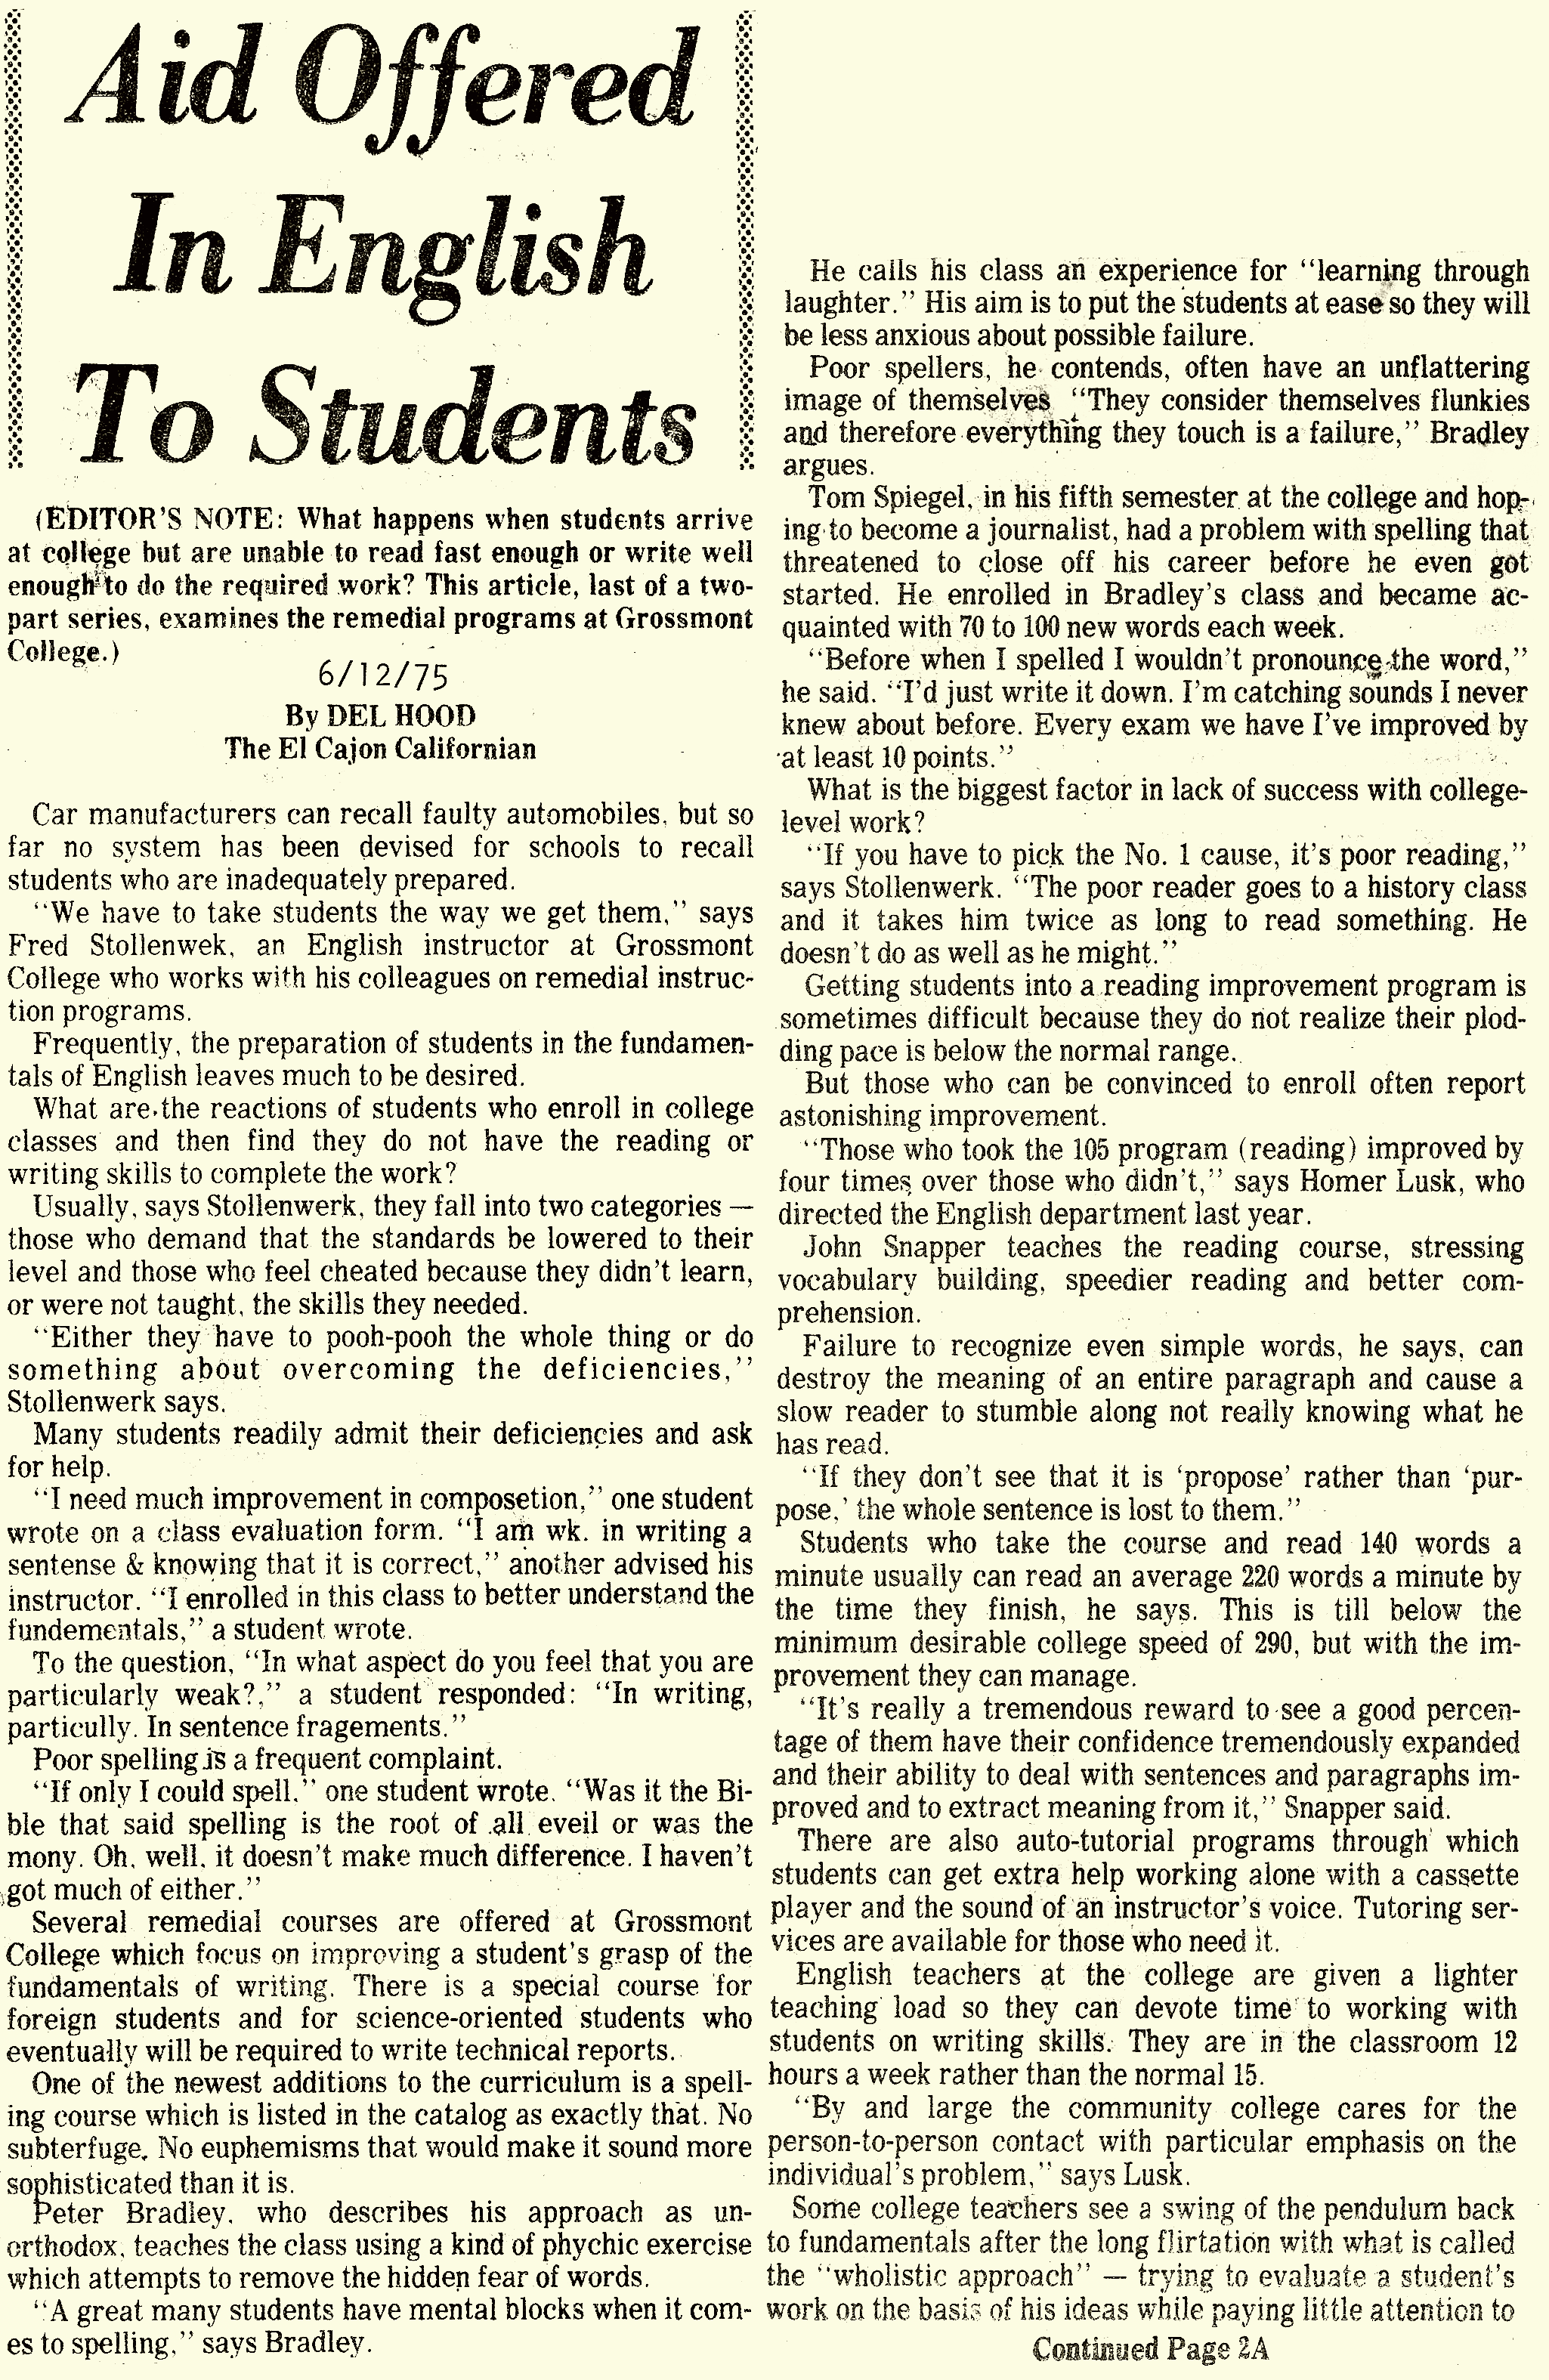 "Aid Offered In English to Students" Daily Californian June 12 1975